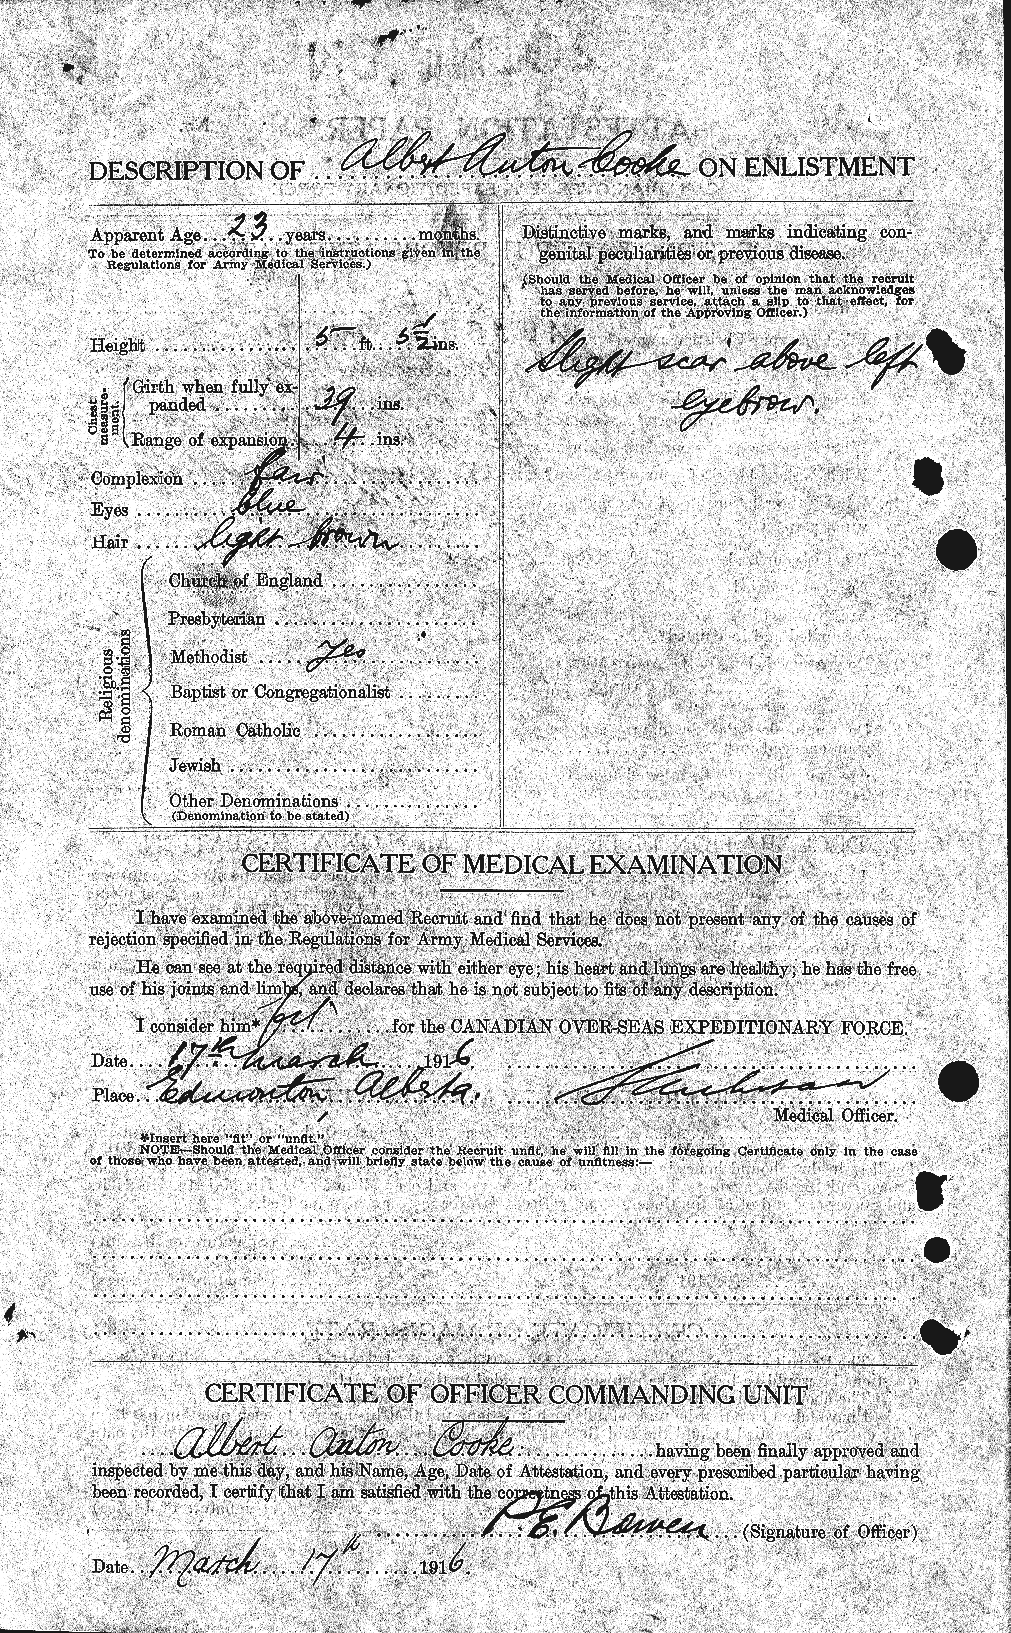 Personnel Records of the First World War - CEF 076873b